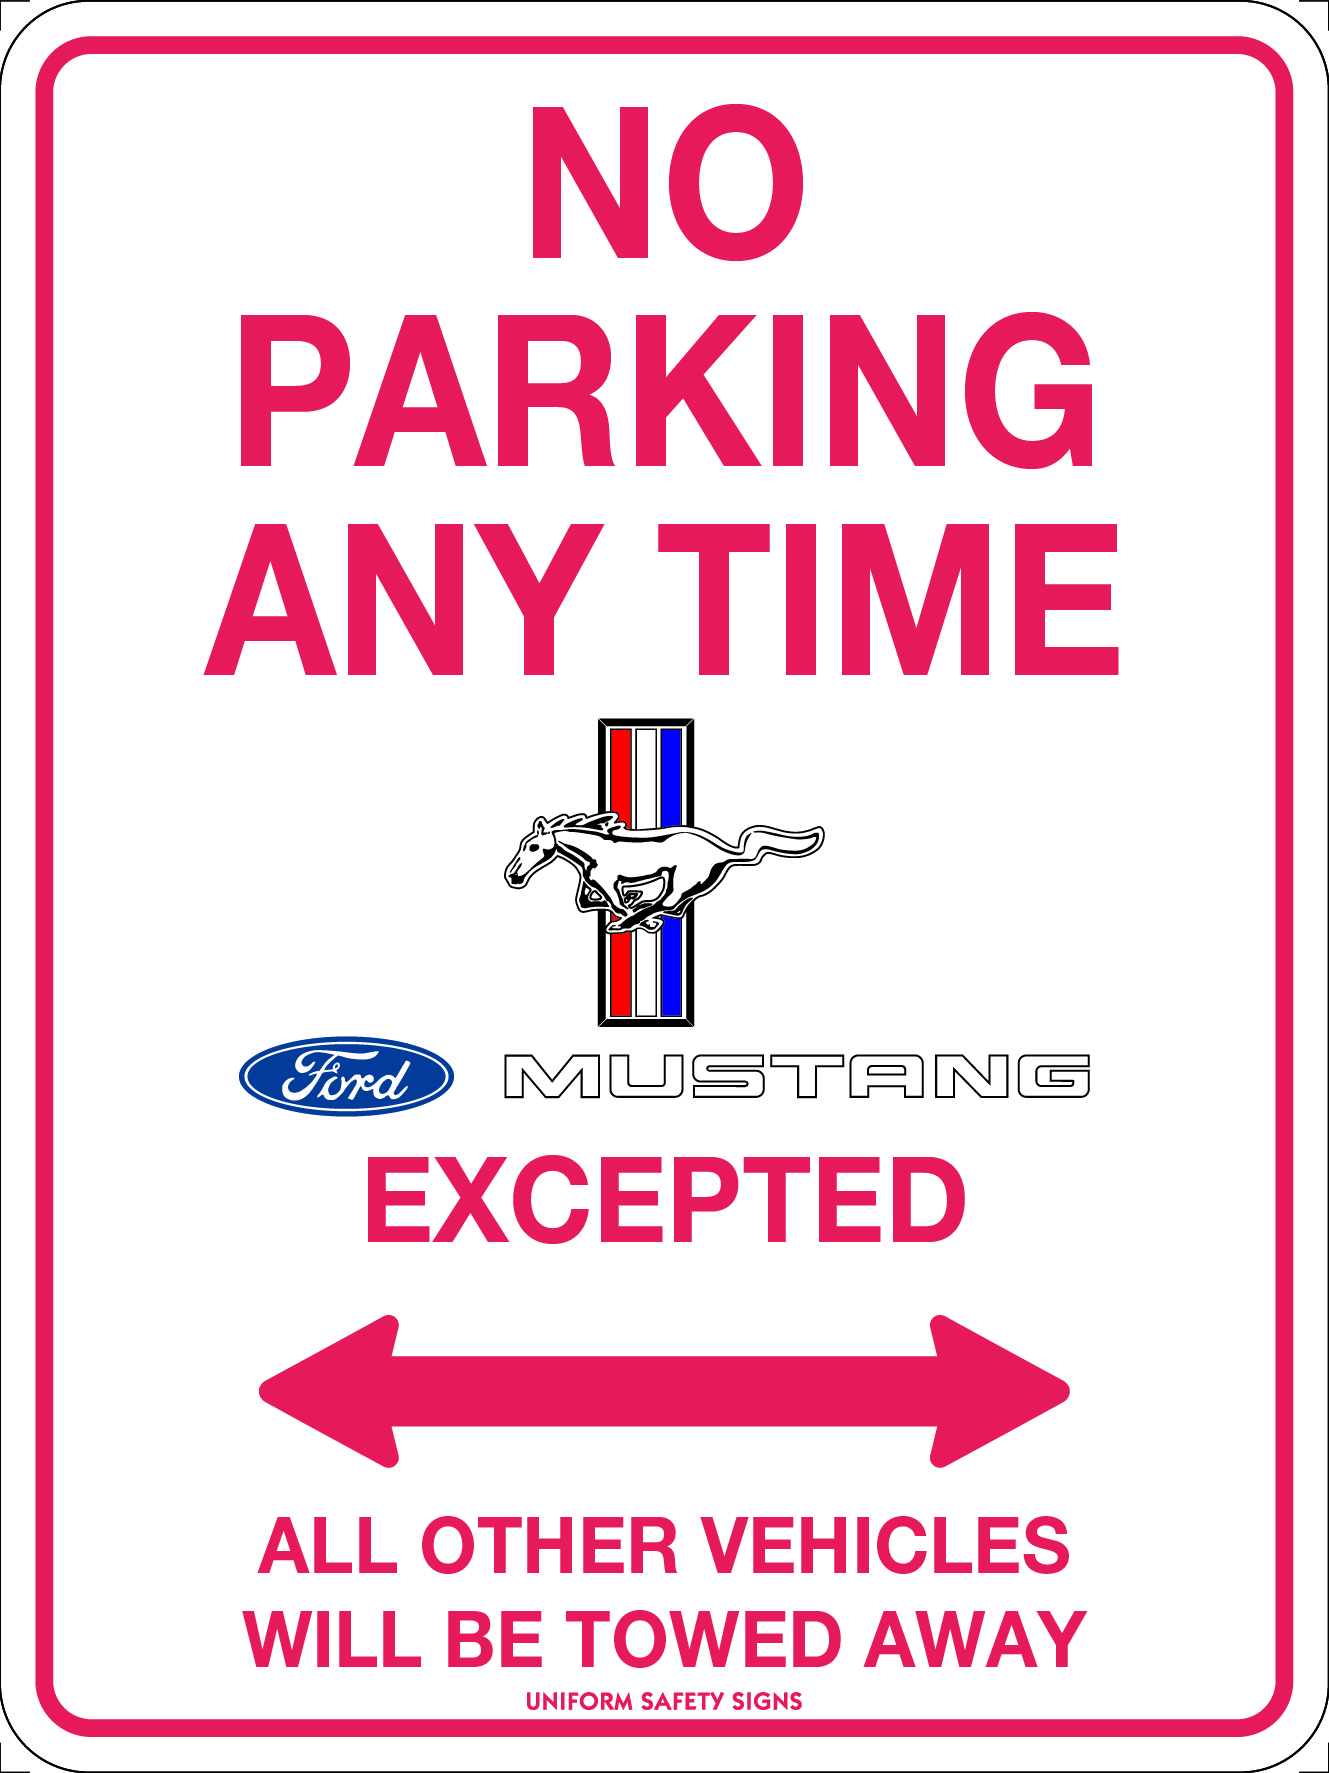 SIGN 300 X 225MM METAL NO PARKING ANYTIME FORD MUSTANG EXCEPTED